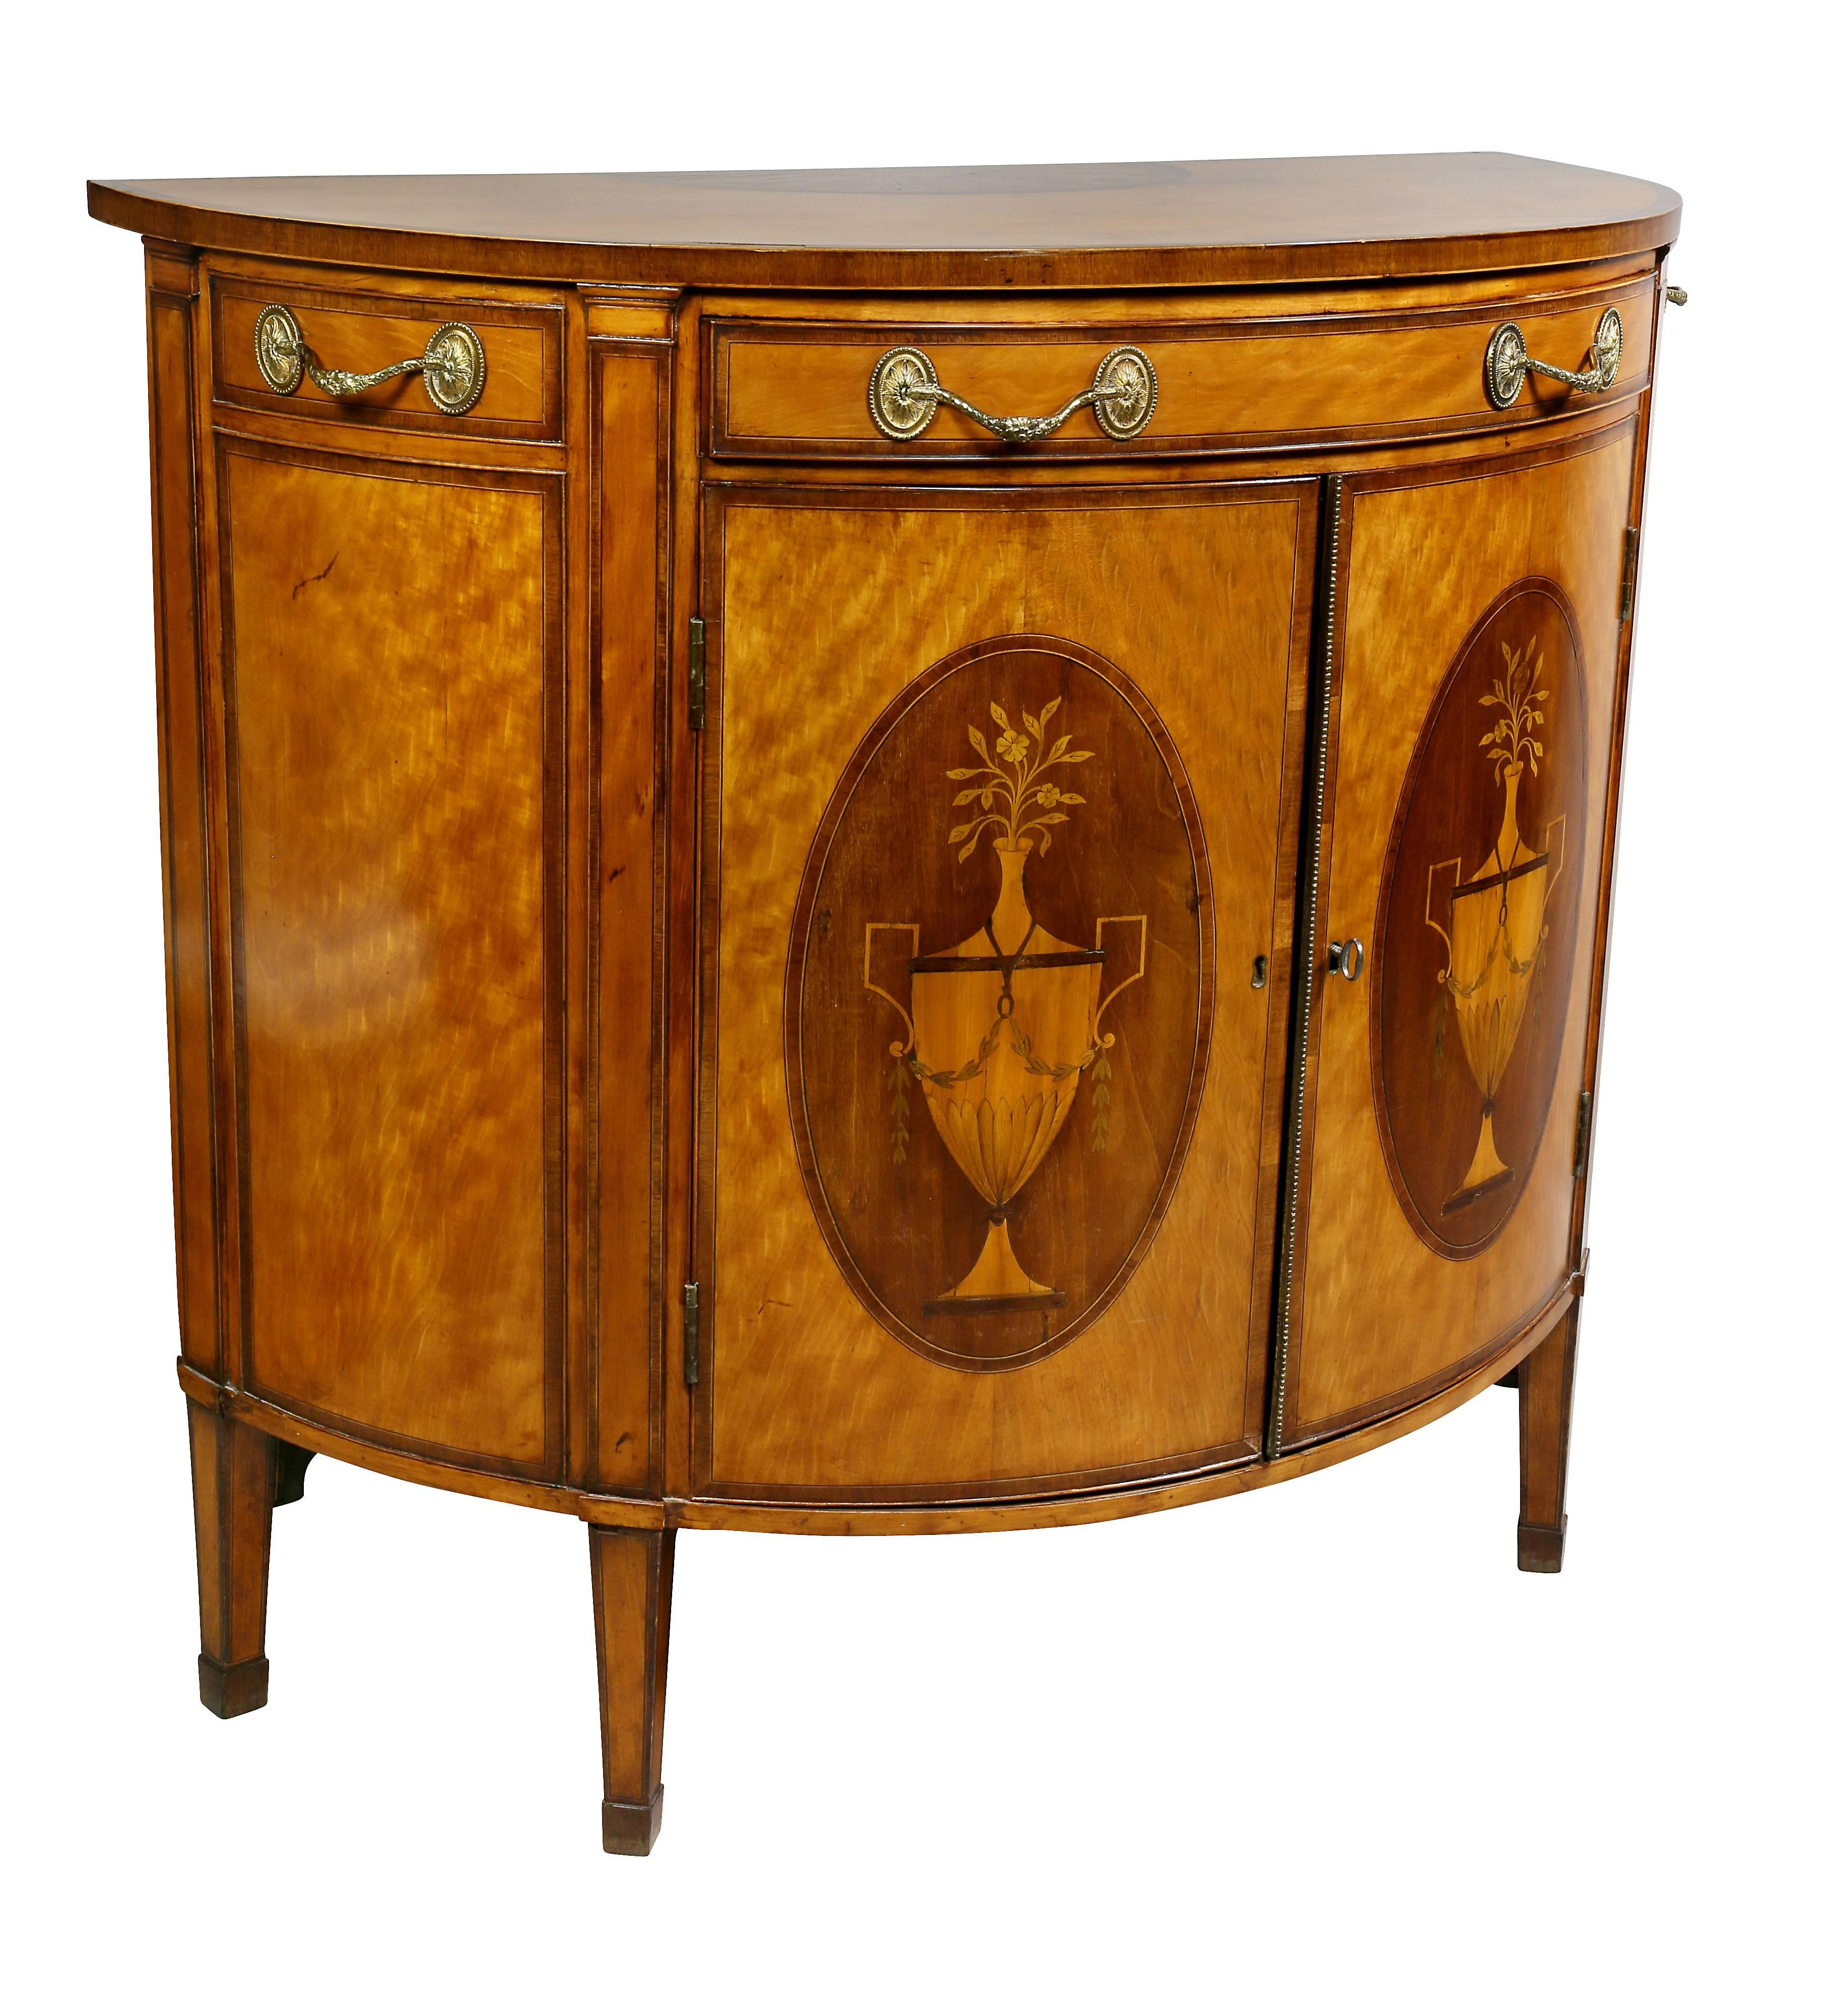 With cross banded top with inlaid lunette over a drawer with fire gilt handles and a pair of doors with inlaid urns within an oval panel enclosing two shelves raised on square tapered legs. Back boards replaced. Written on inside edge of door frame